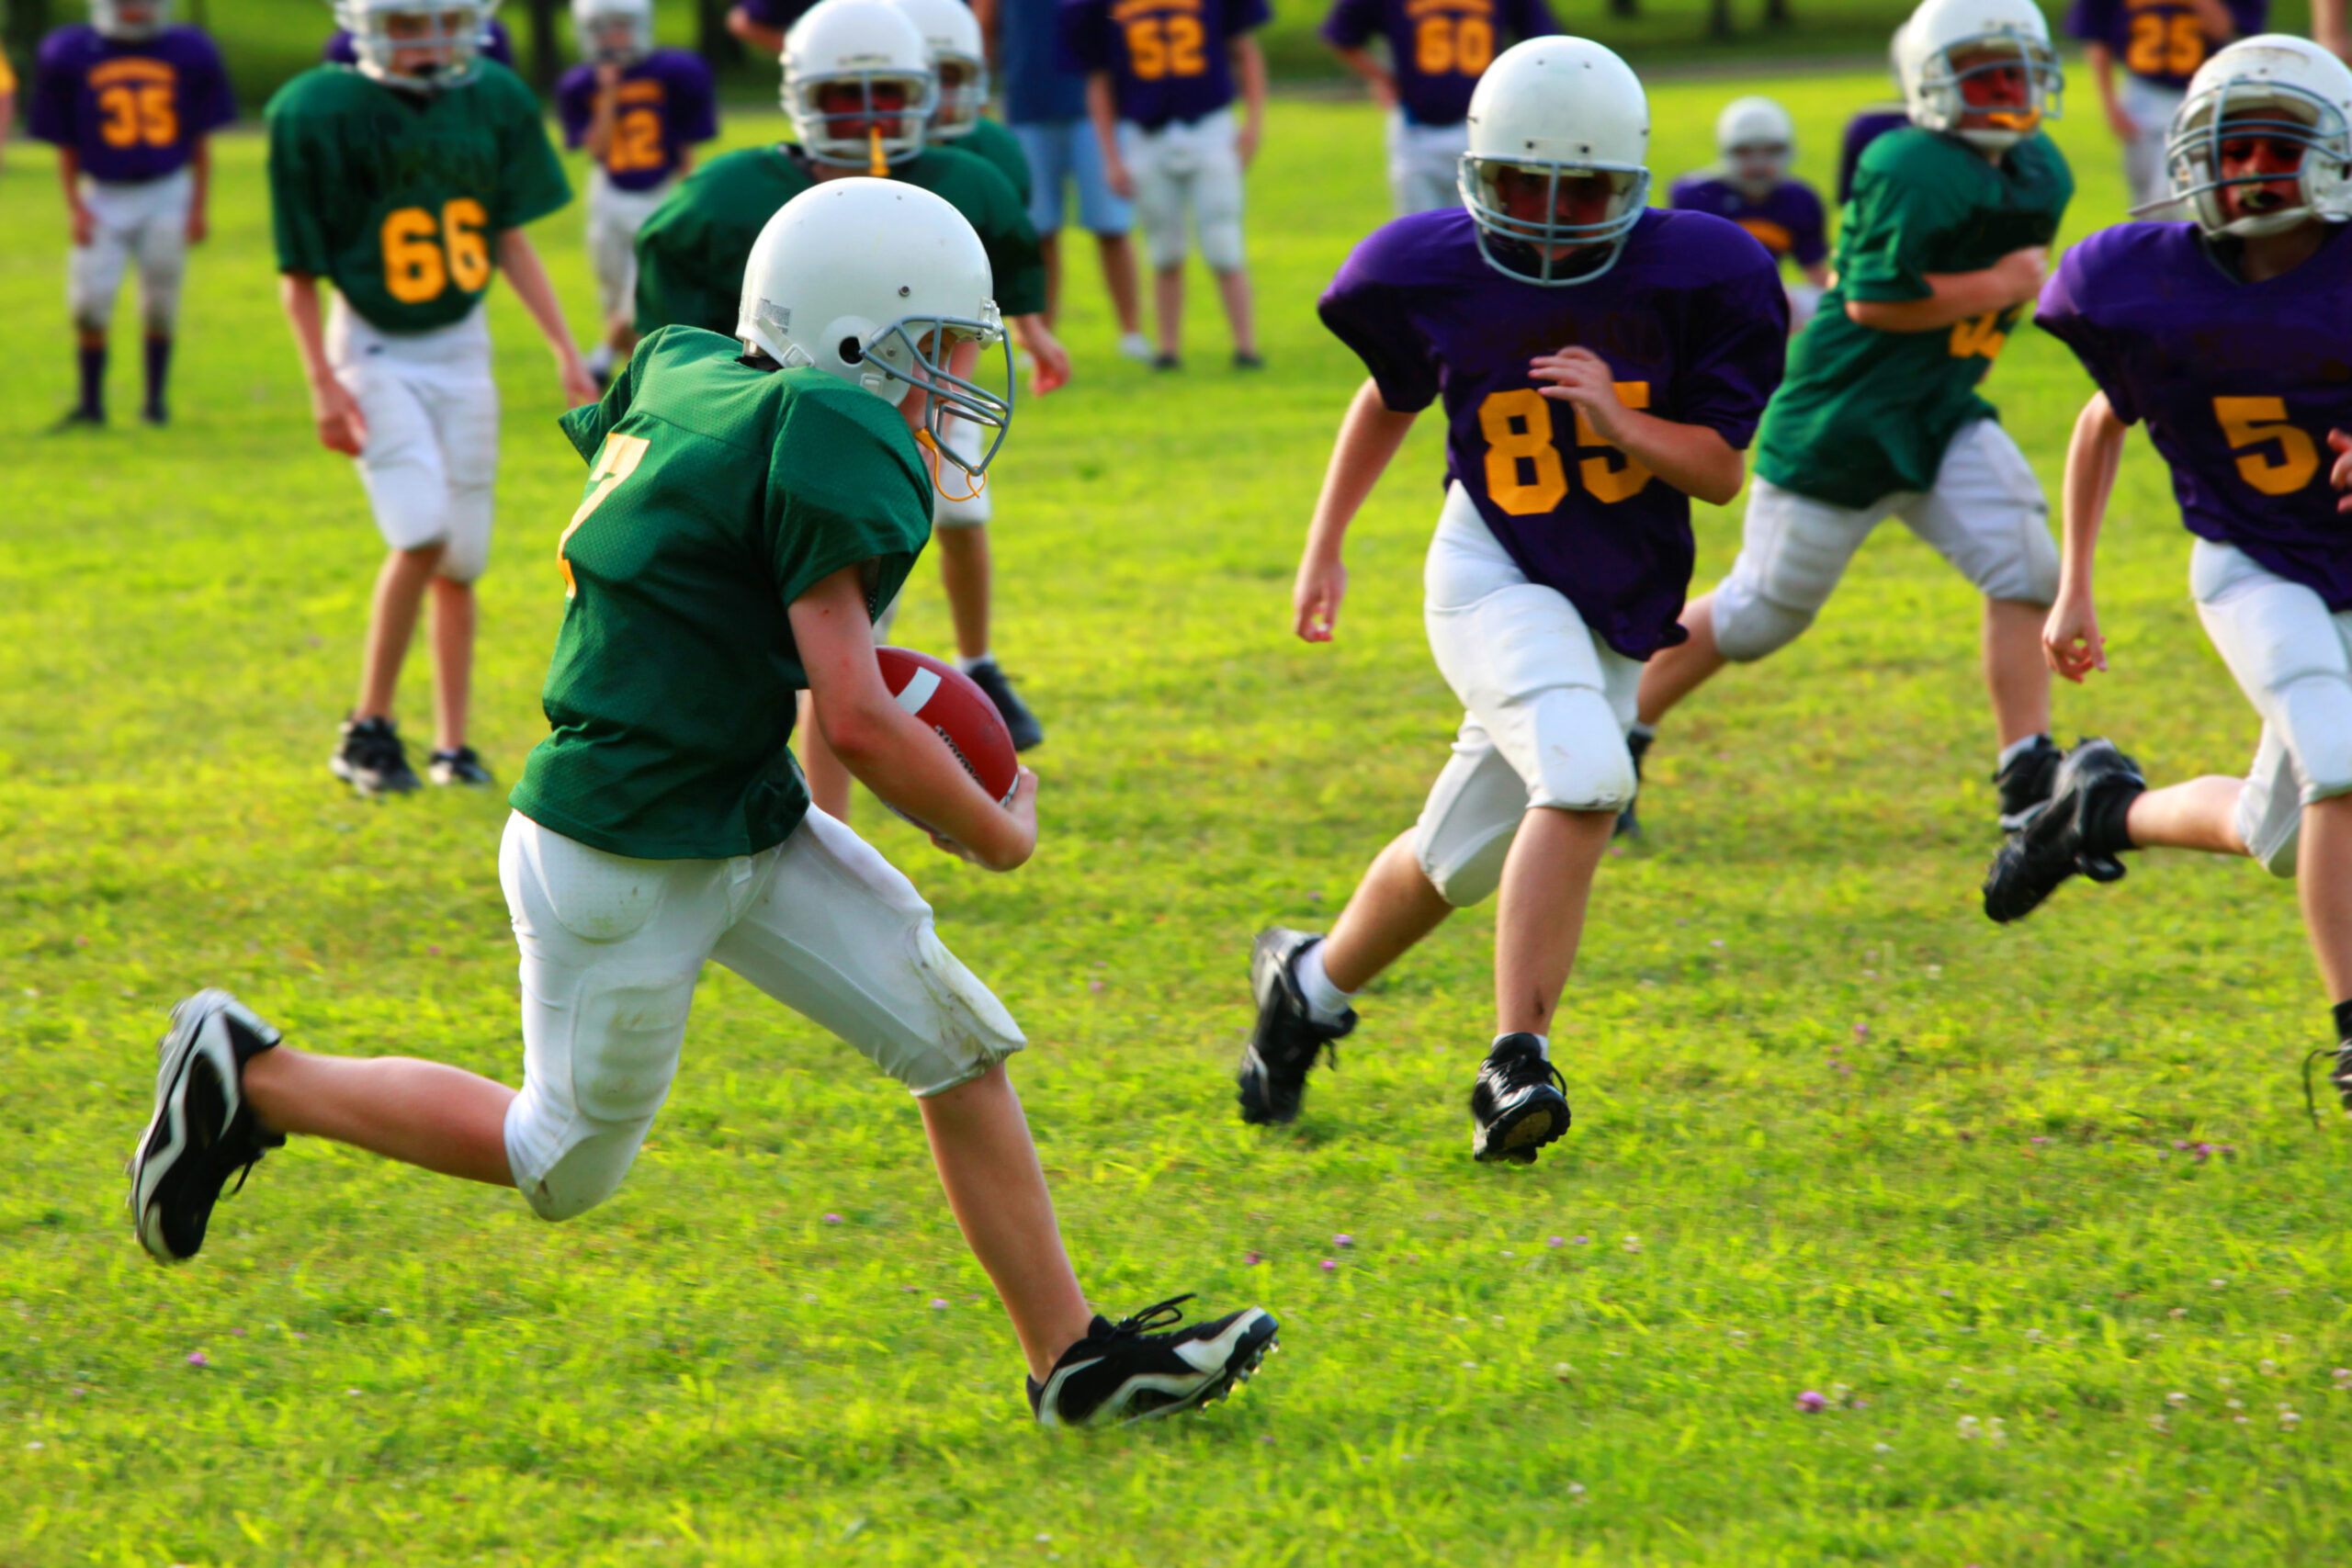 Summertime Sports Safety